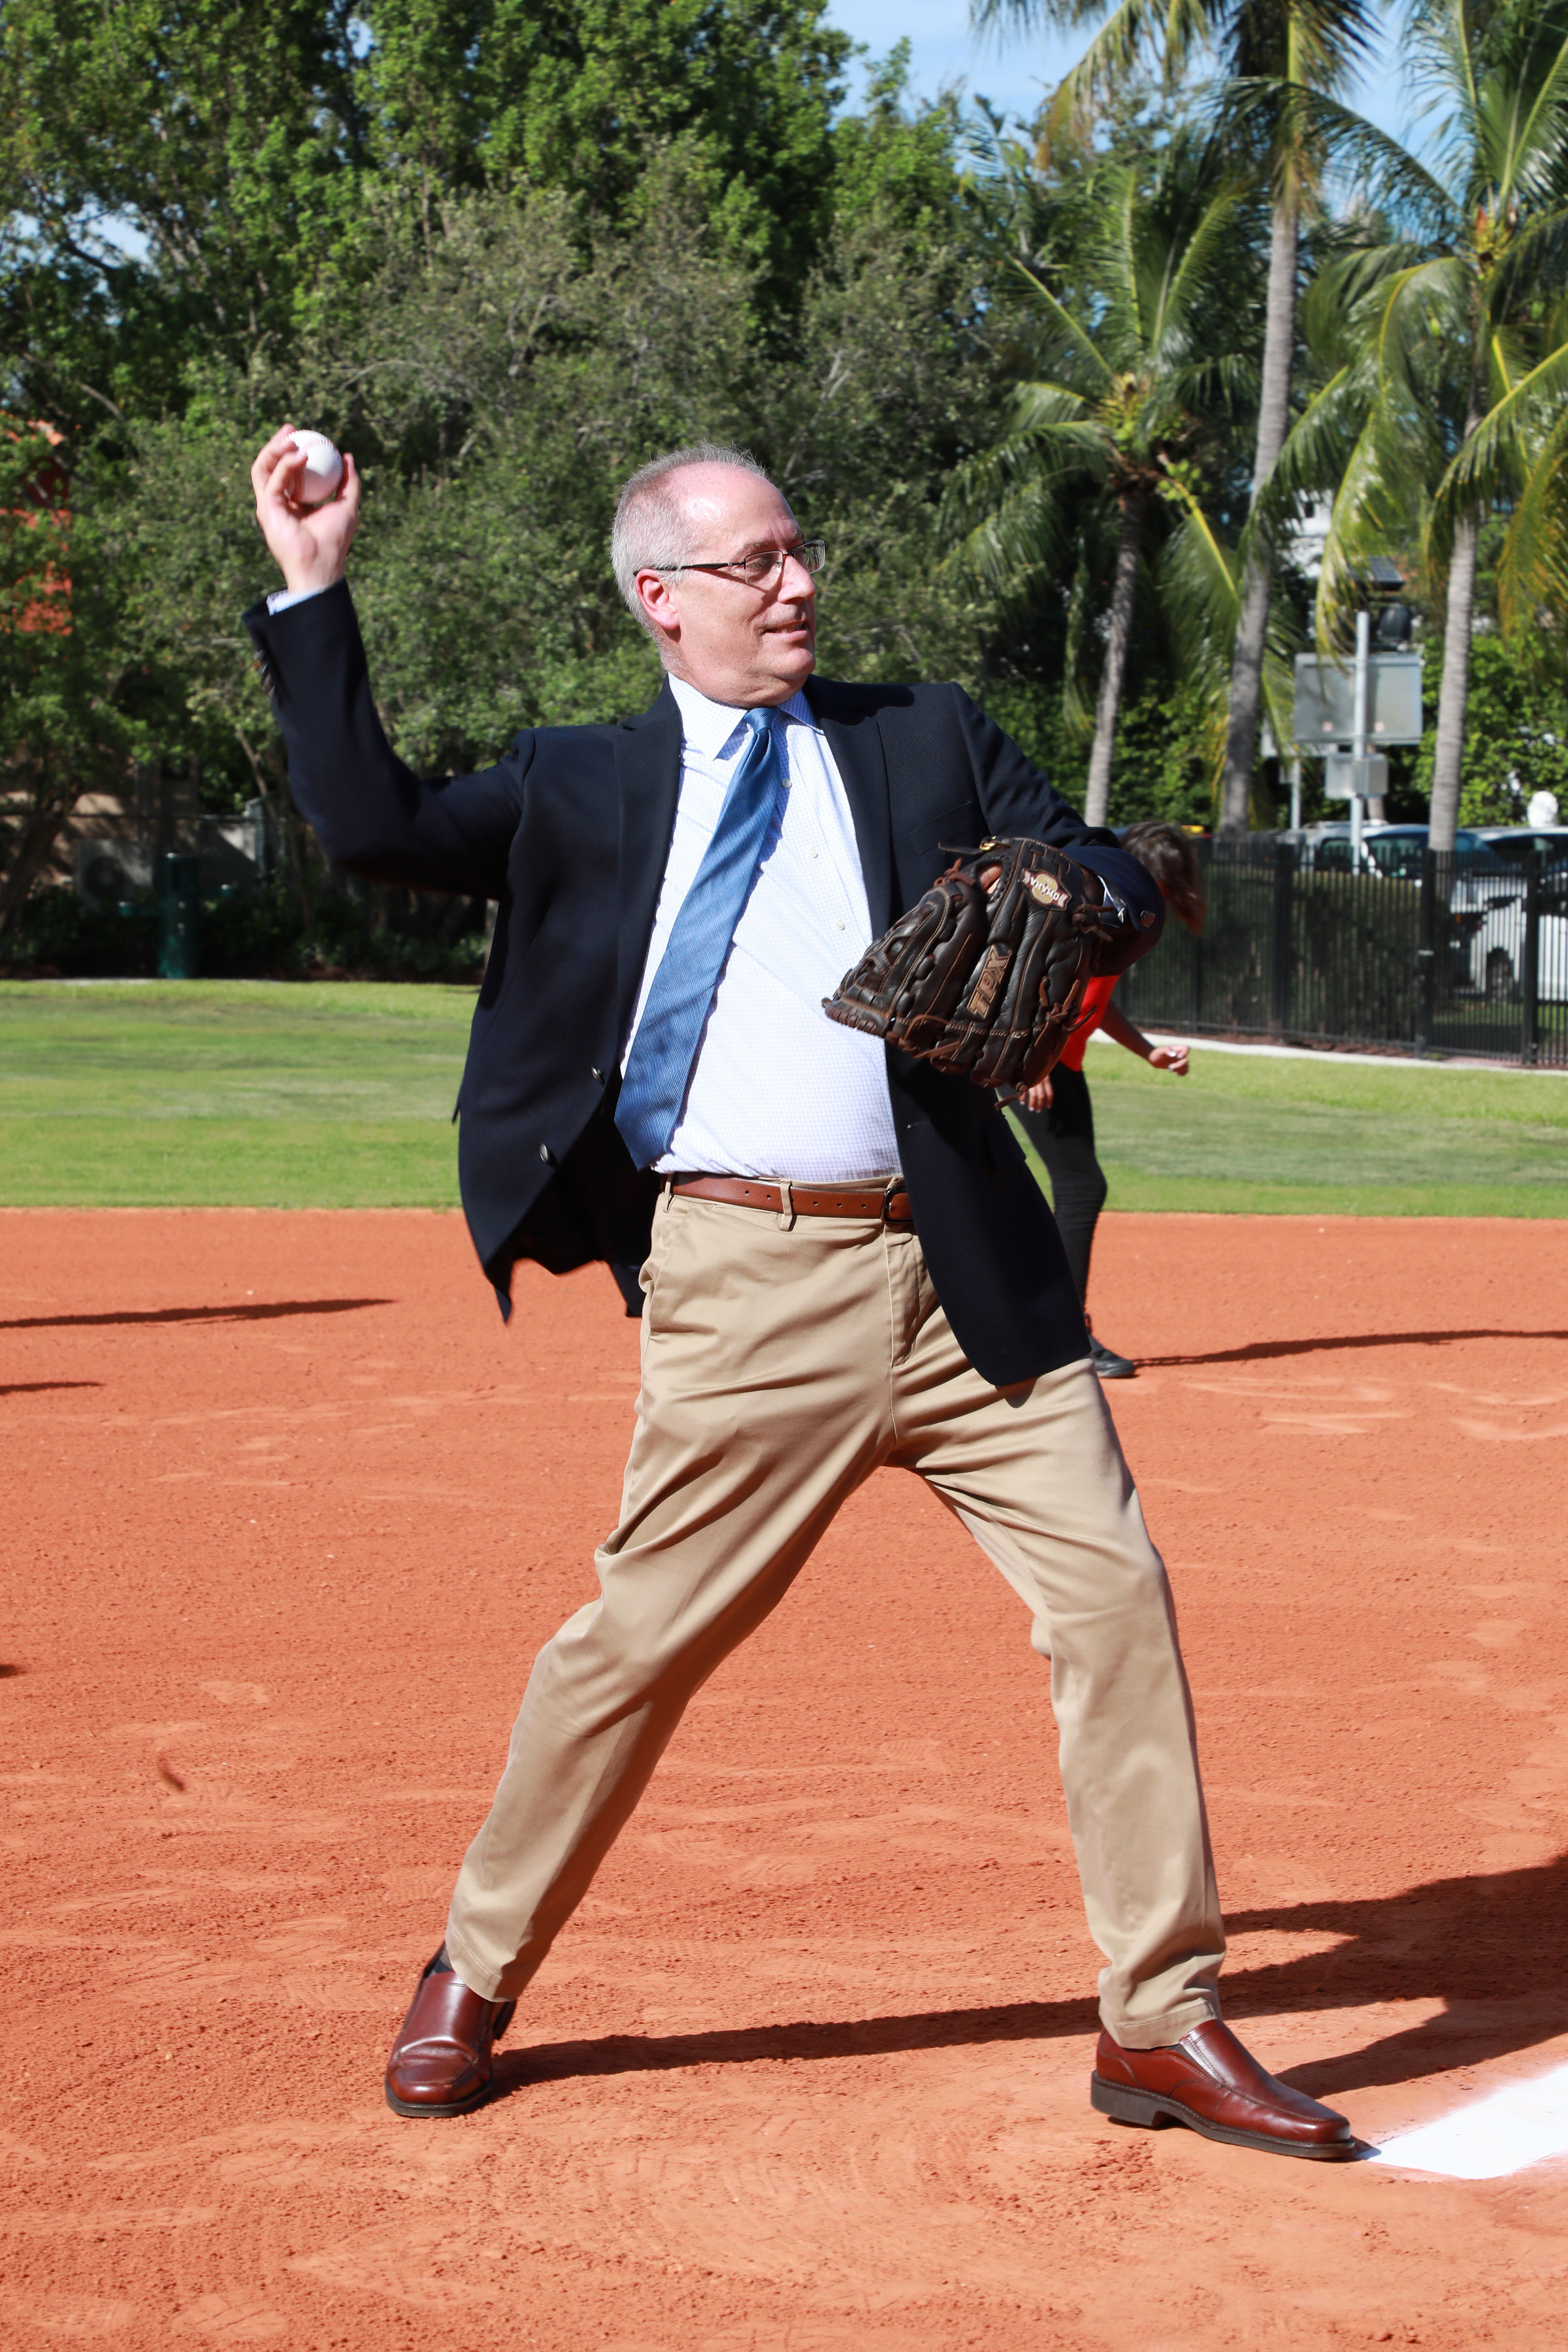 Mayor Gelber throwing the first official pitch on the new field.